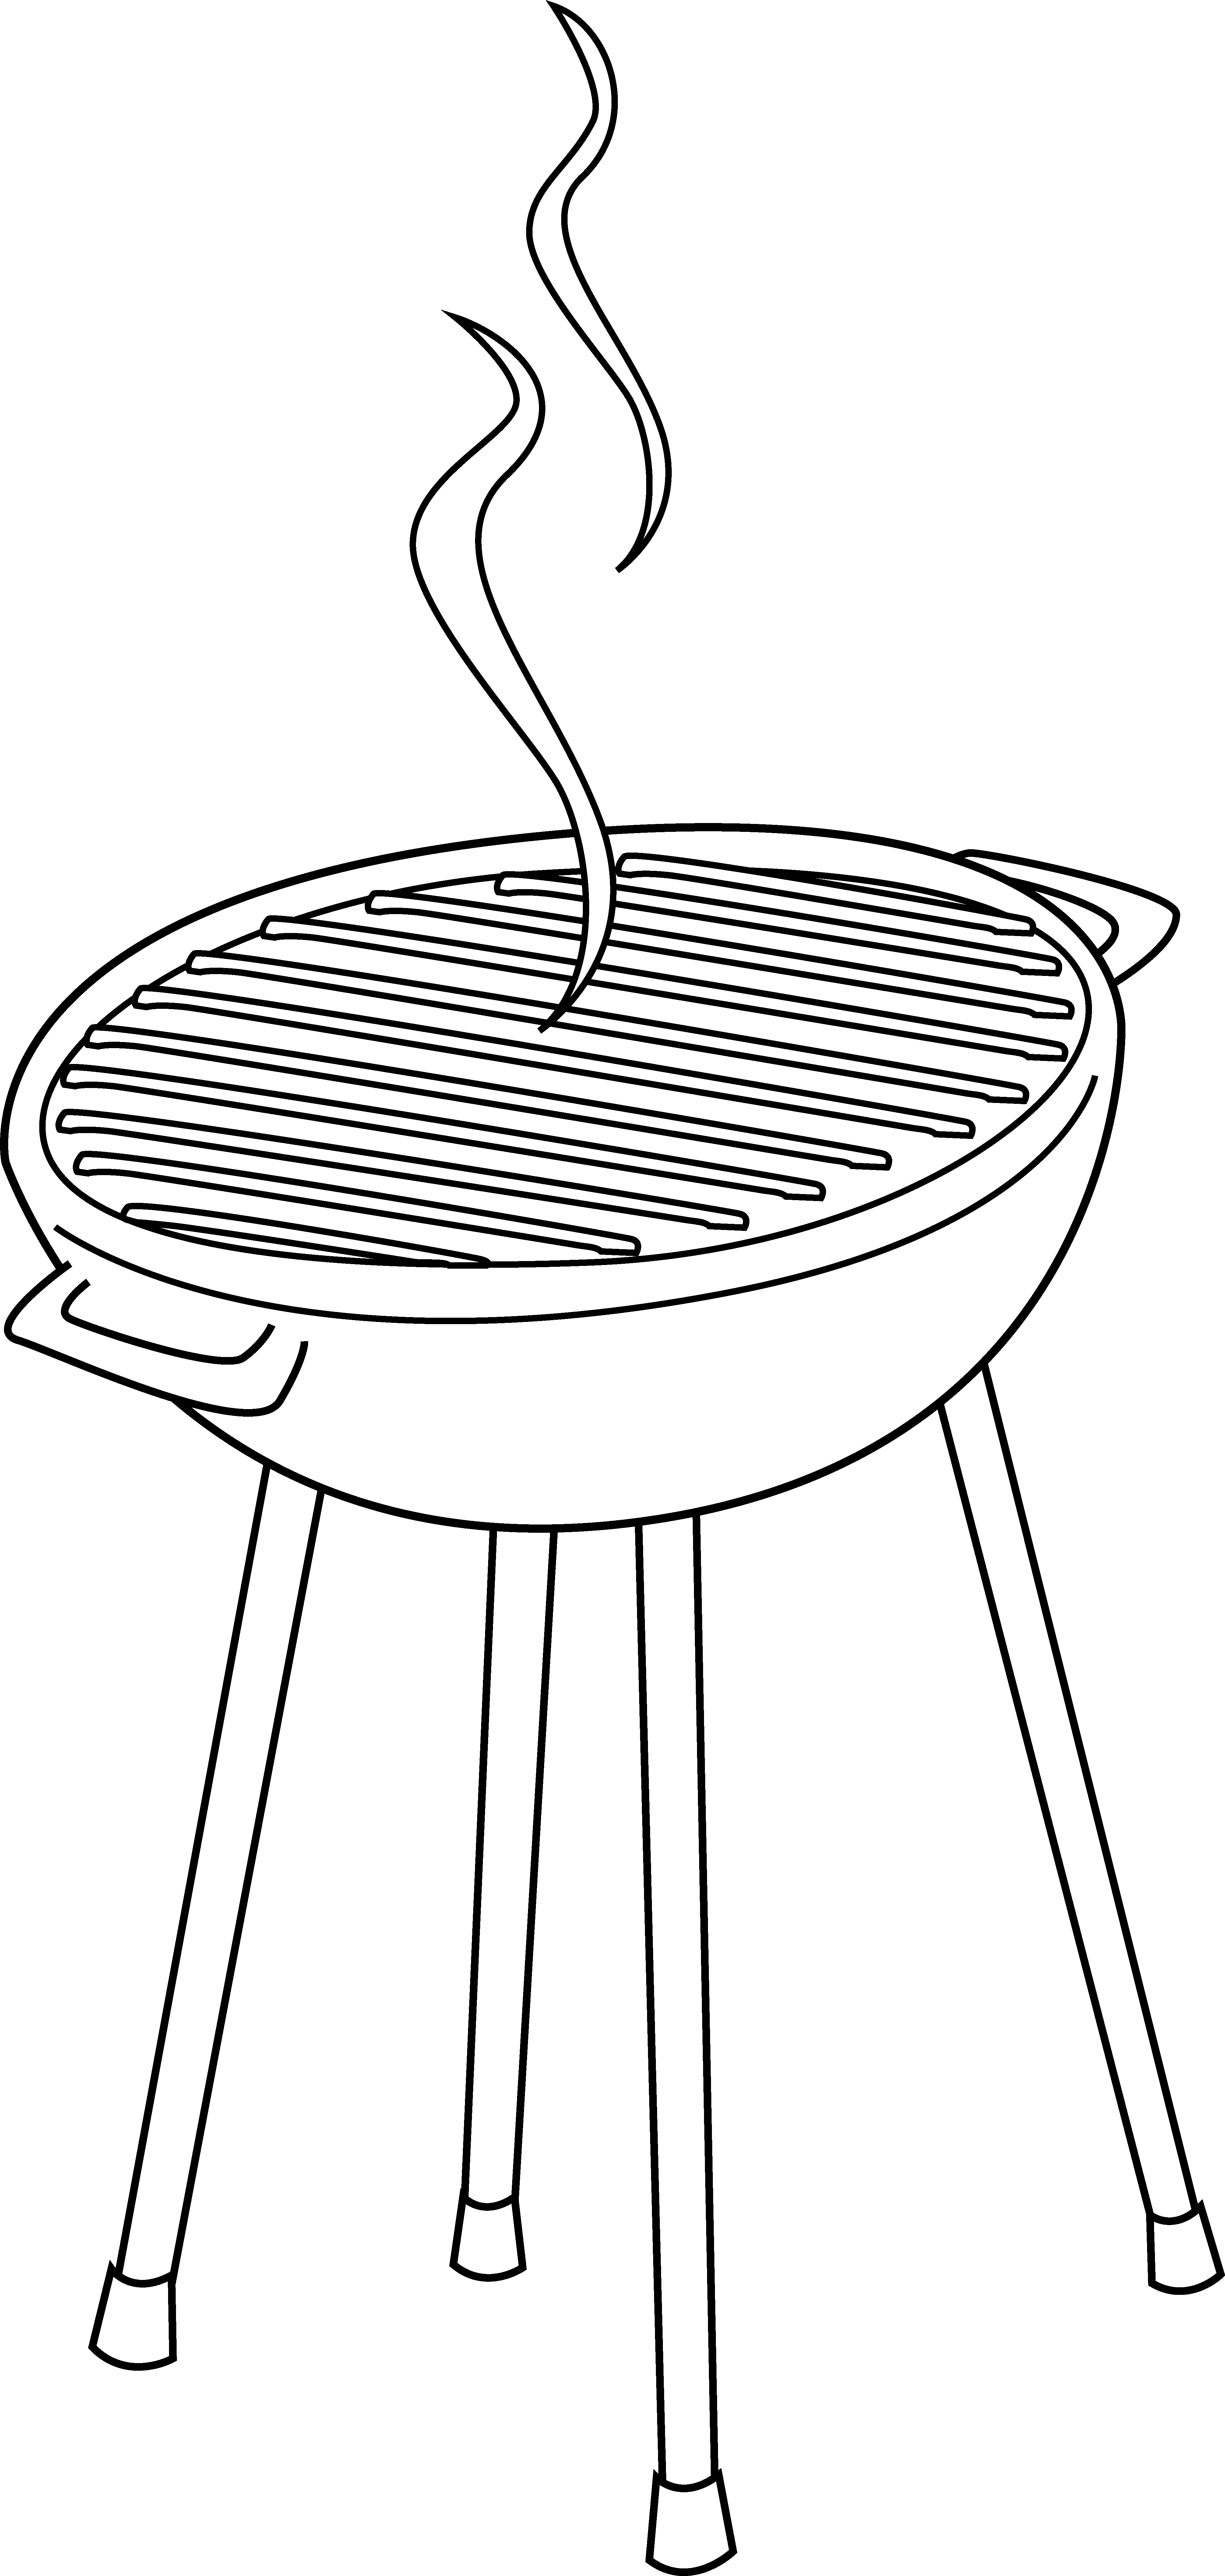 Grilling clipart summer.  collection of bbq